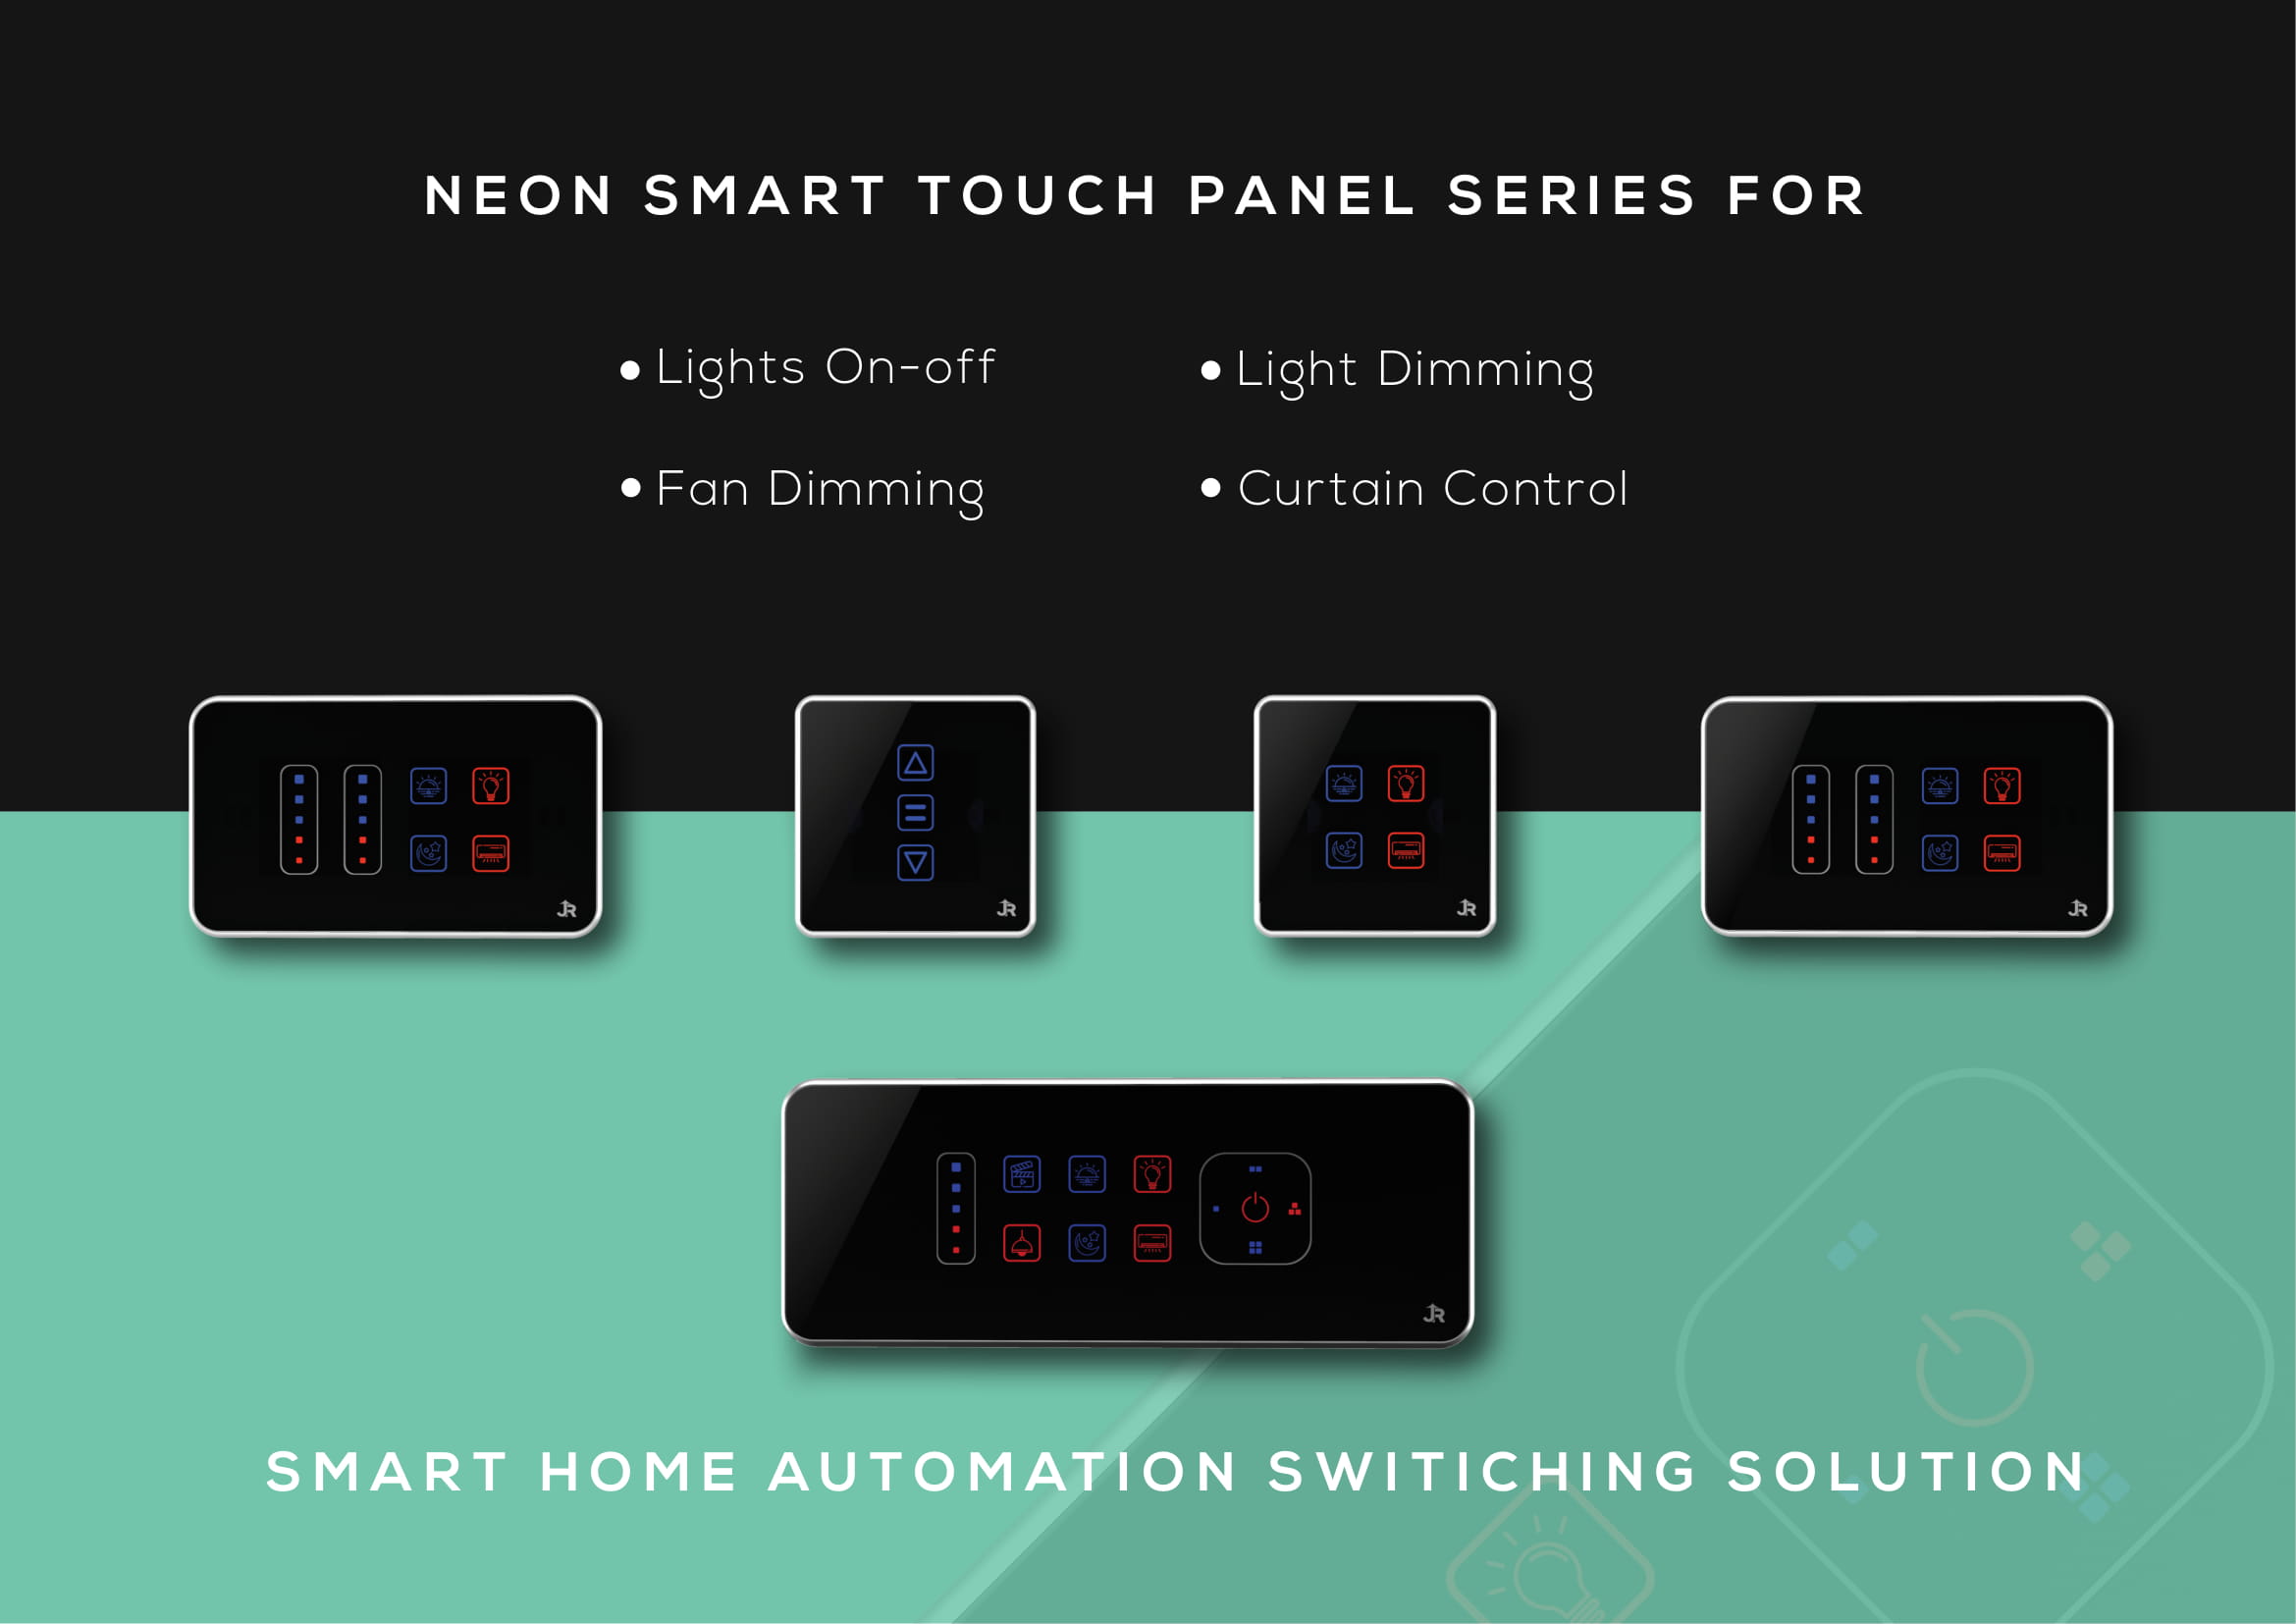 Which controller is compatible with Z-wave based neon series smart touch panels?